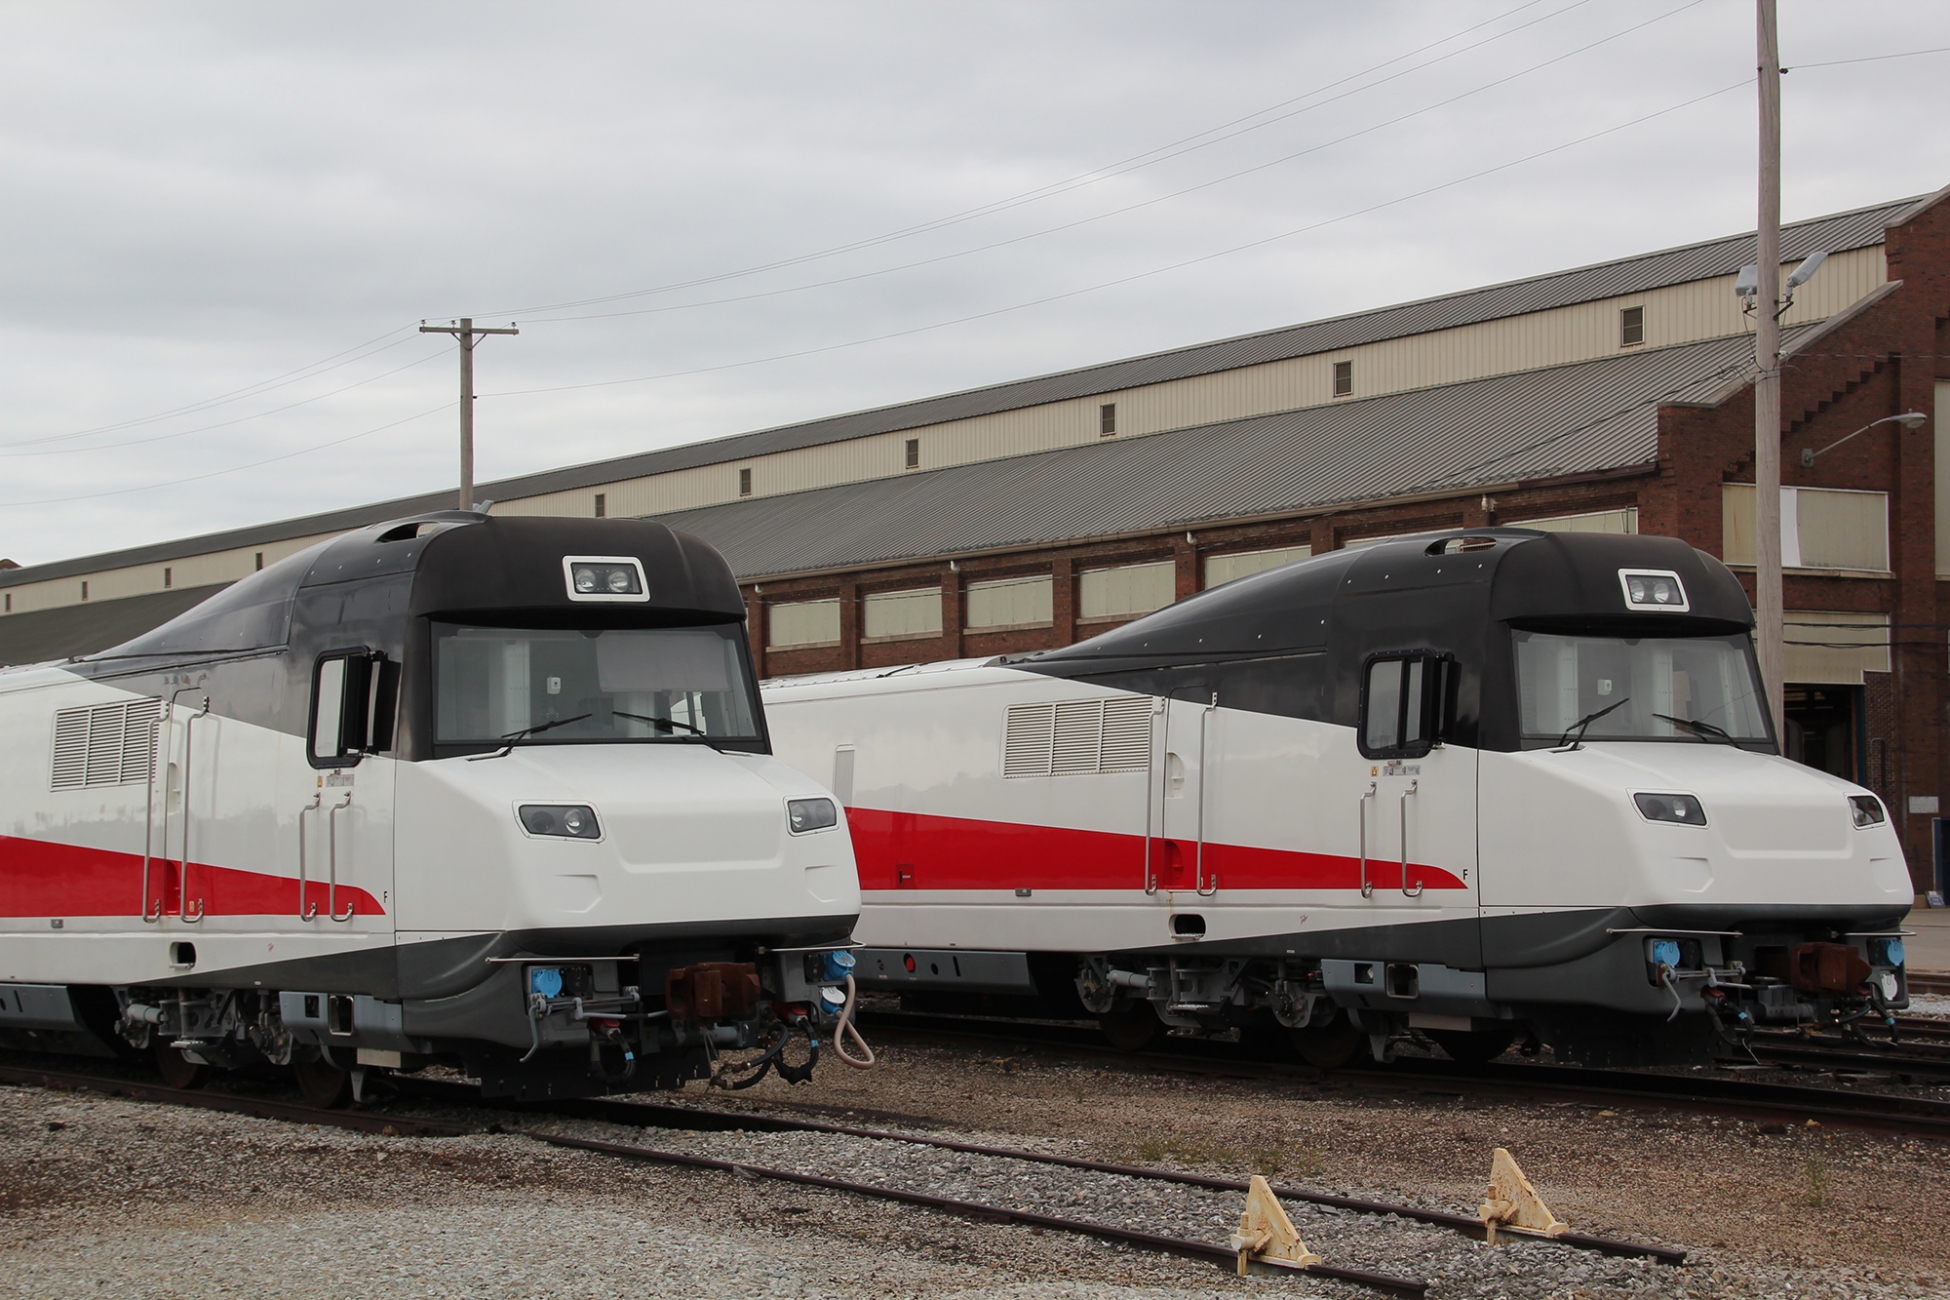 The Talgo trains orginally designed and built for Wisconsin sit at an Amtrak facility in Beech Grove, Ind. Photo by Shawn Johnson/WPR.